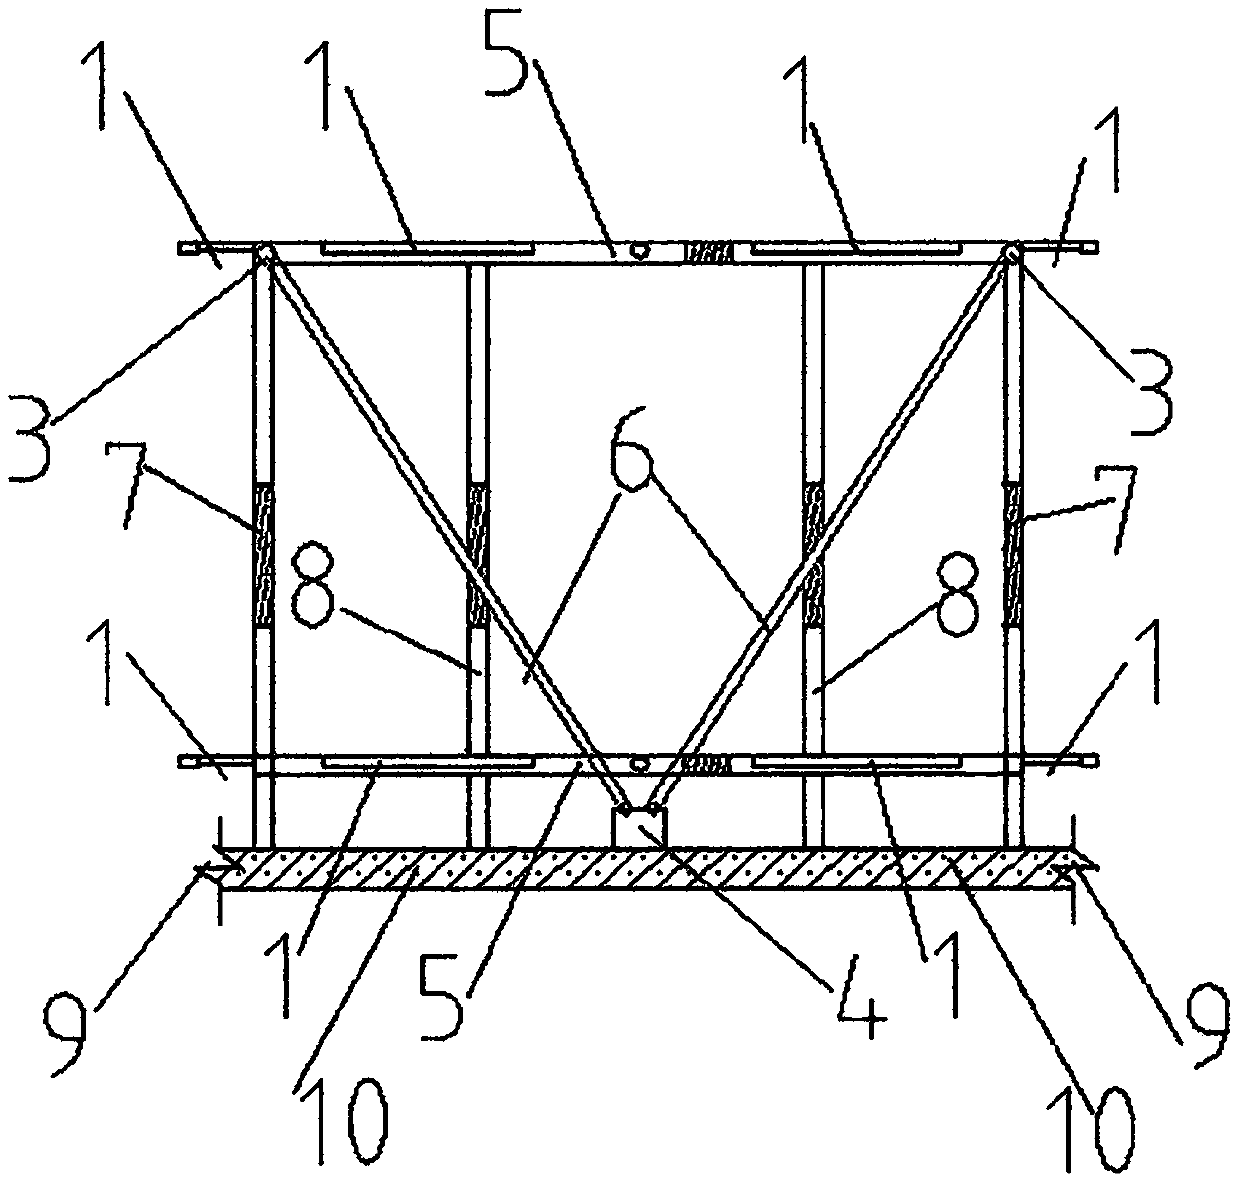 Folding fabricated building prefabricated superposed shear wall, beam and plate mounting rectangular steel frame supporting system